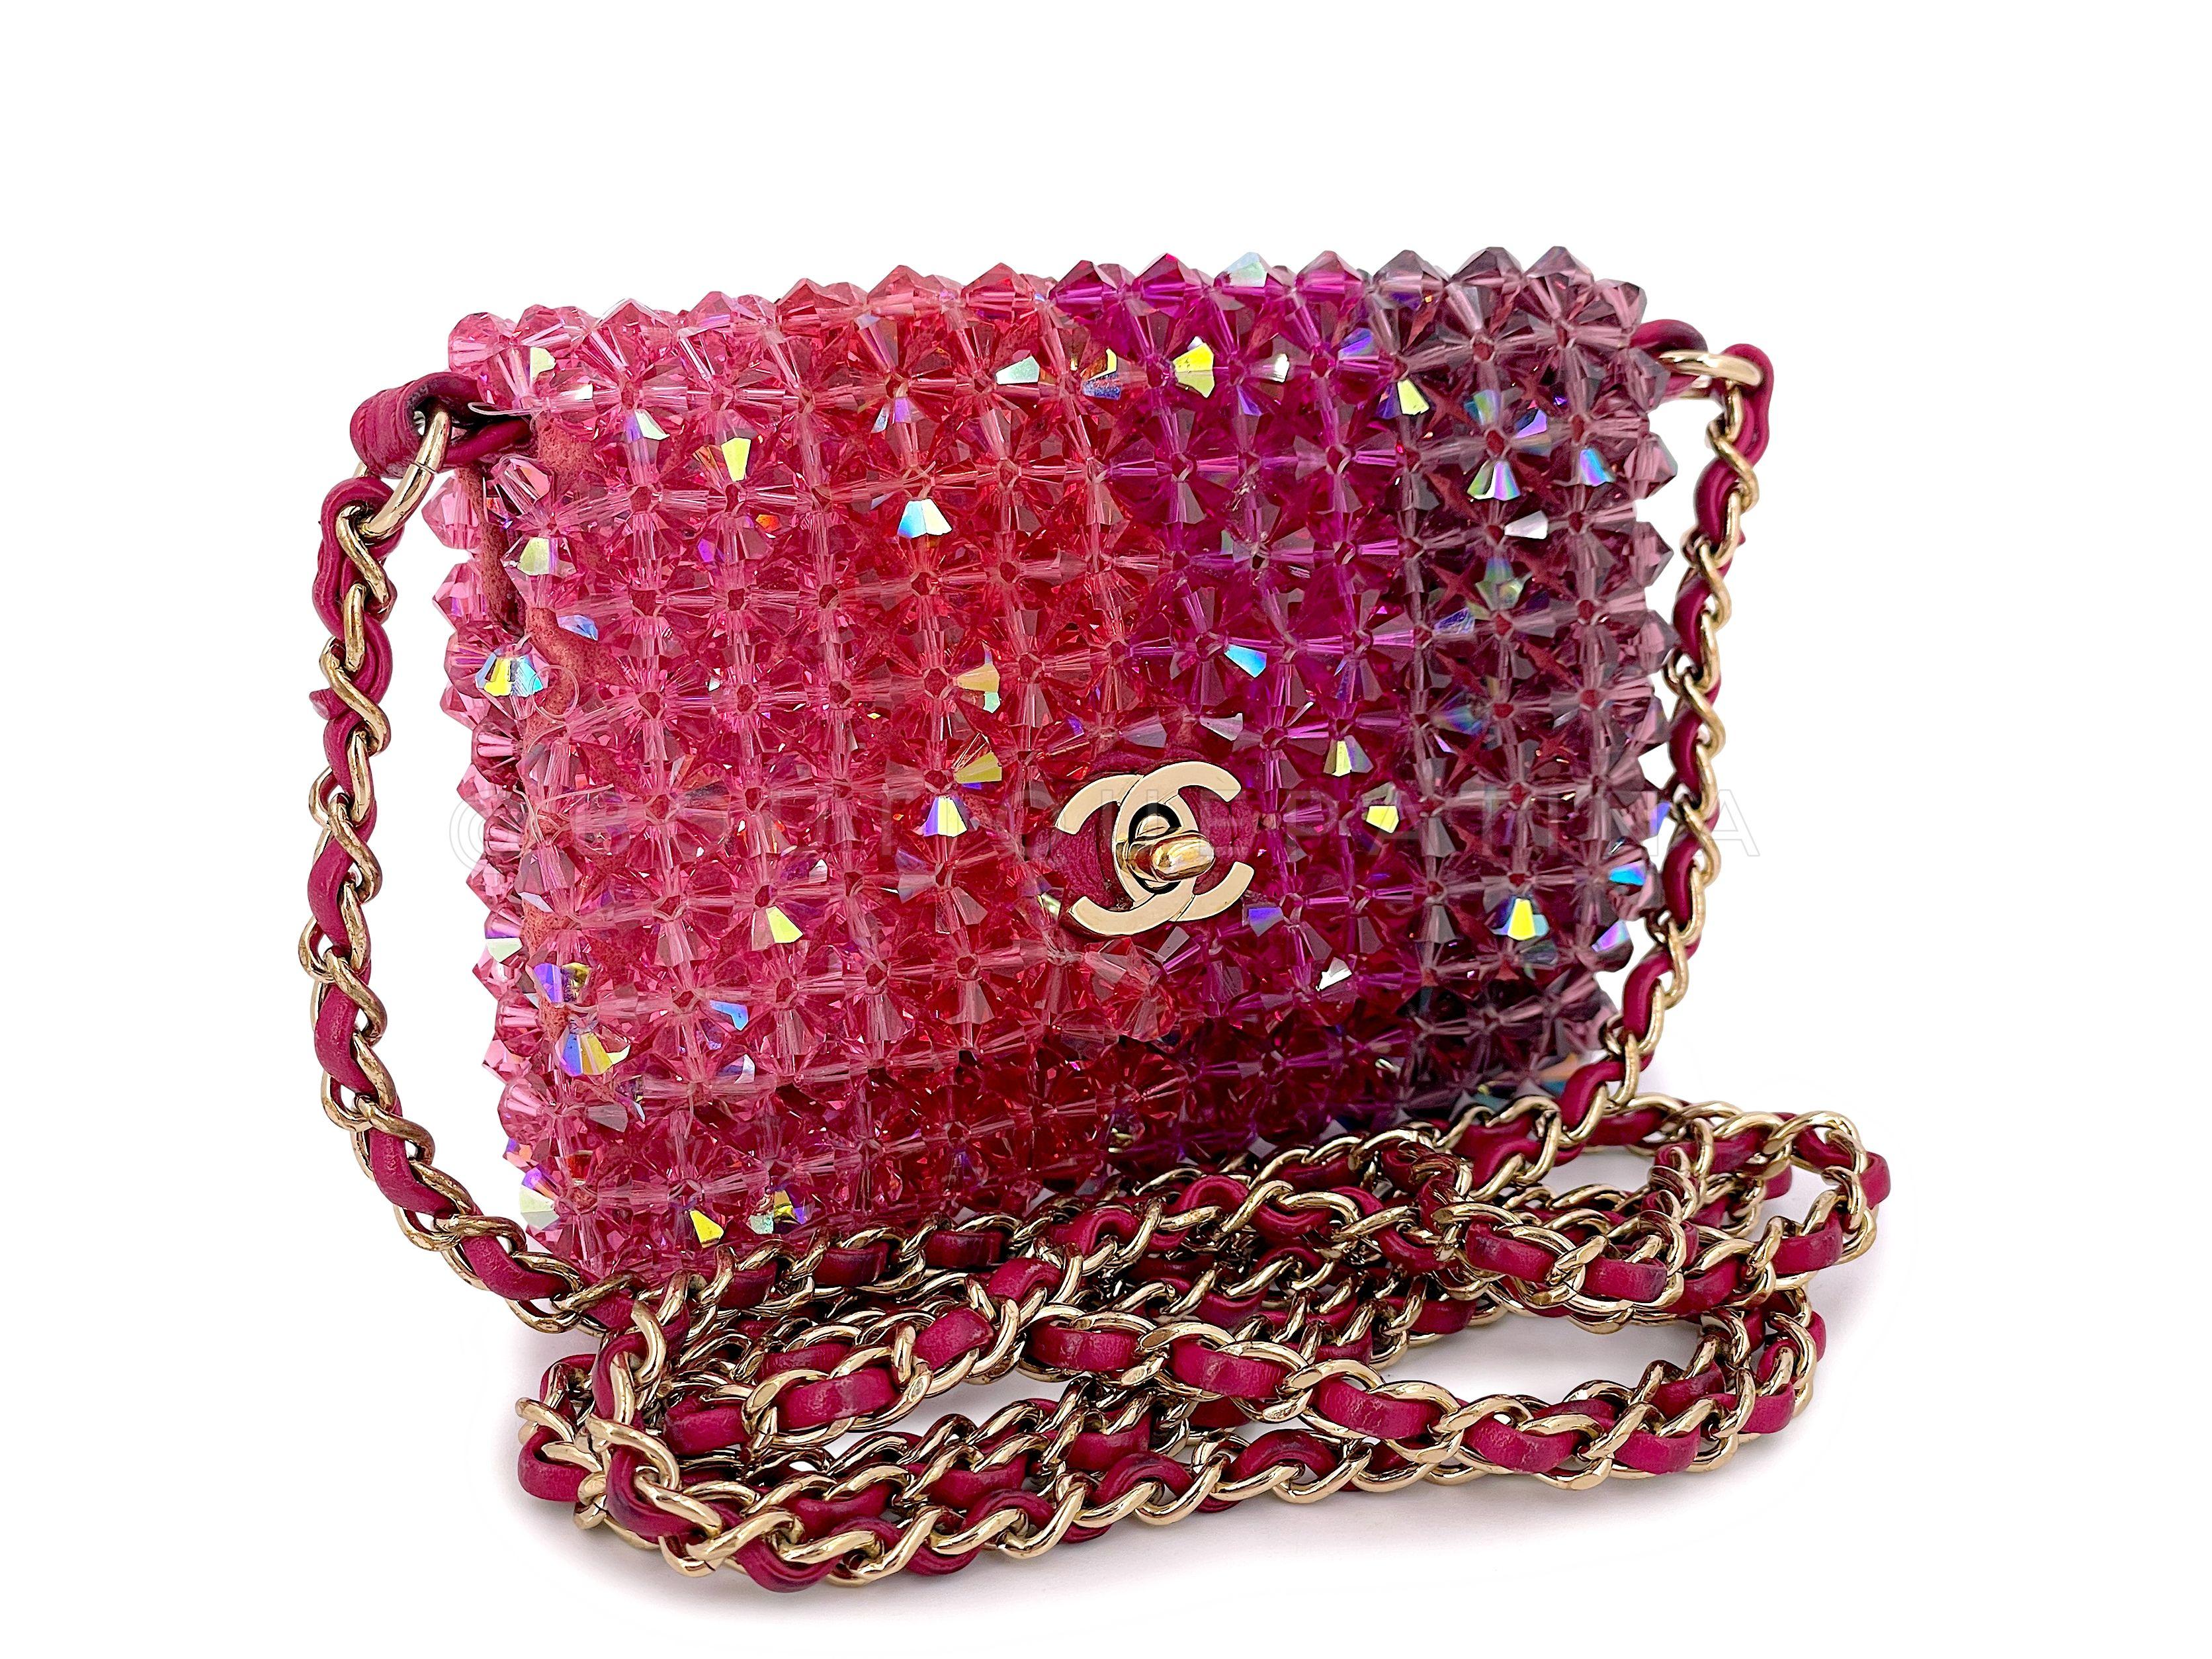 Store item: 67187
A very special runway piece from 2020, a micro mini crossbody with woven chain, varied pink-hued pyramid shaped crystals with iridescent/holographic overlay with a CC turnlock flap.

Does not fit a phone. 

In pink iridescent